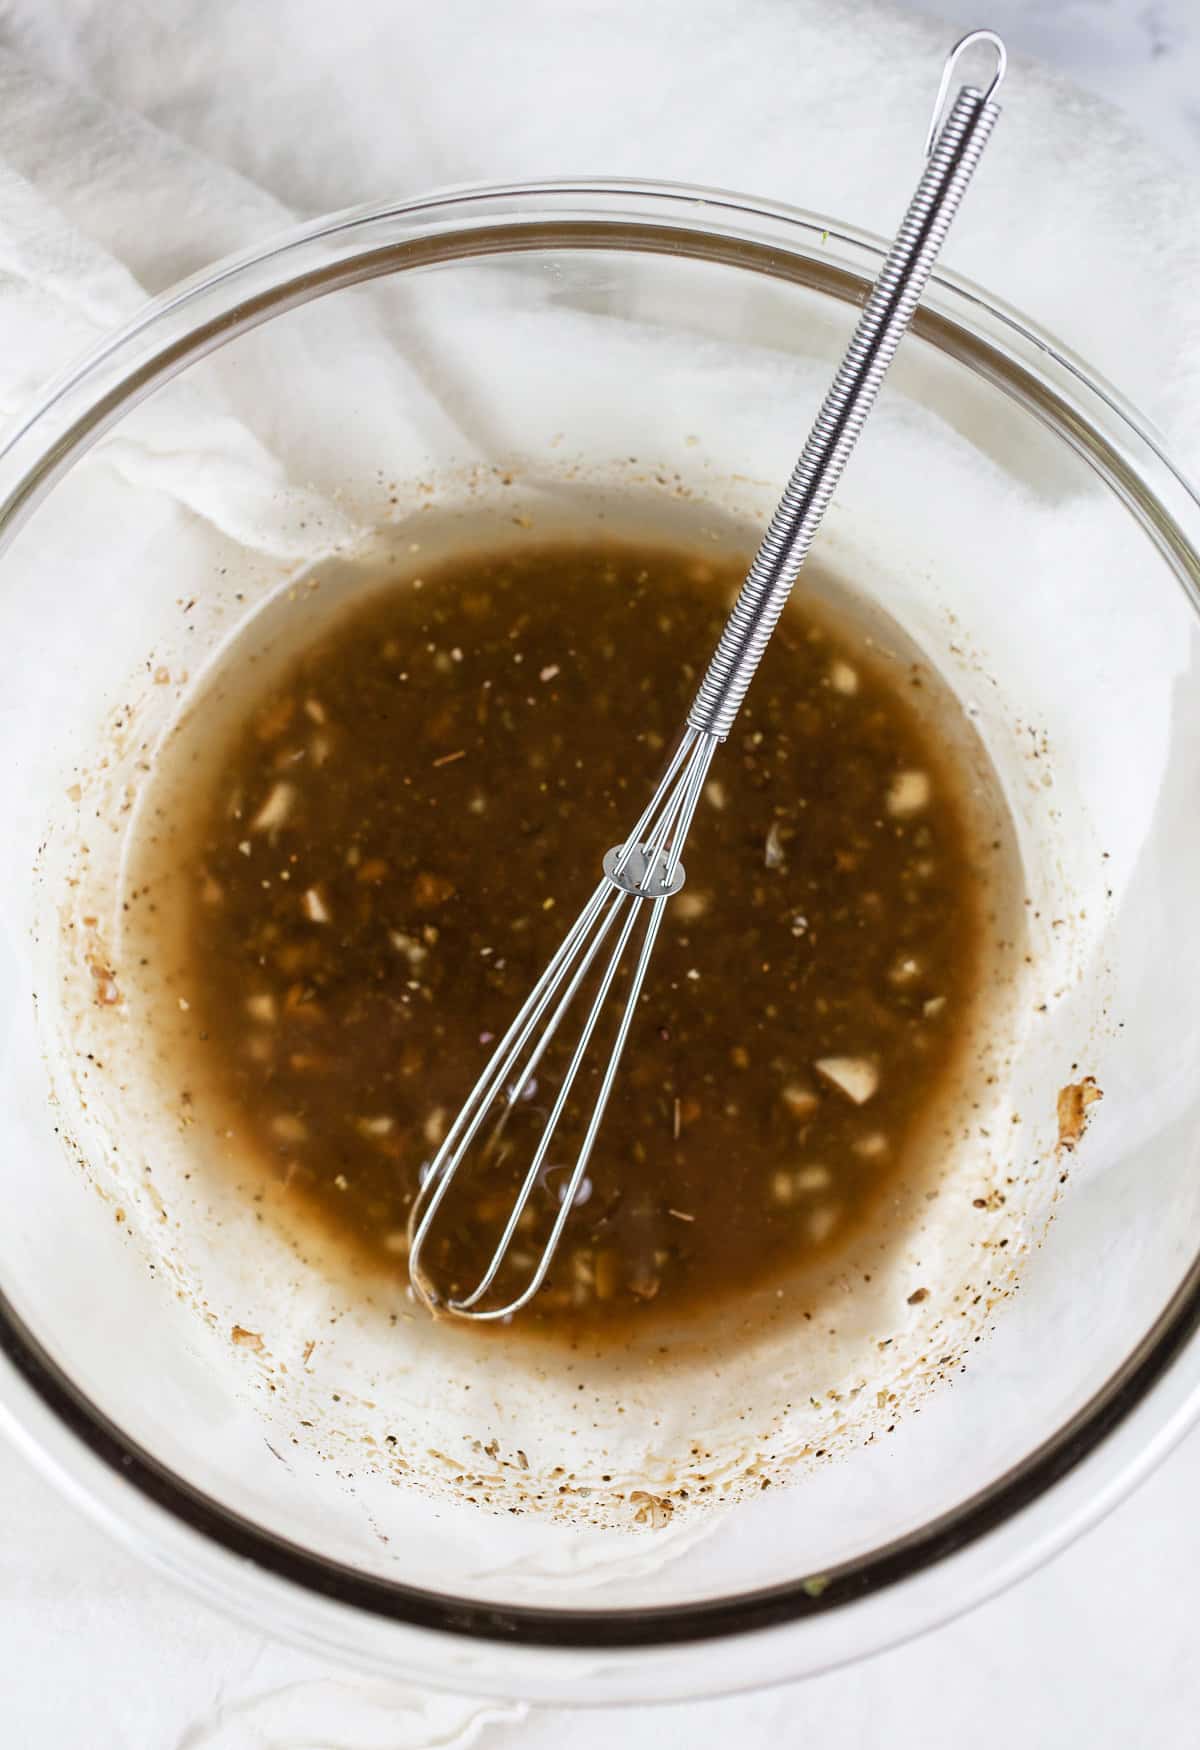 Balsamic dressing in small glass bowl with whisk.